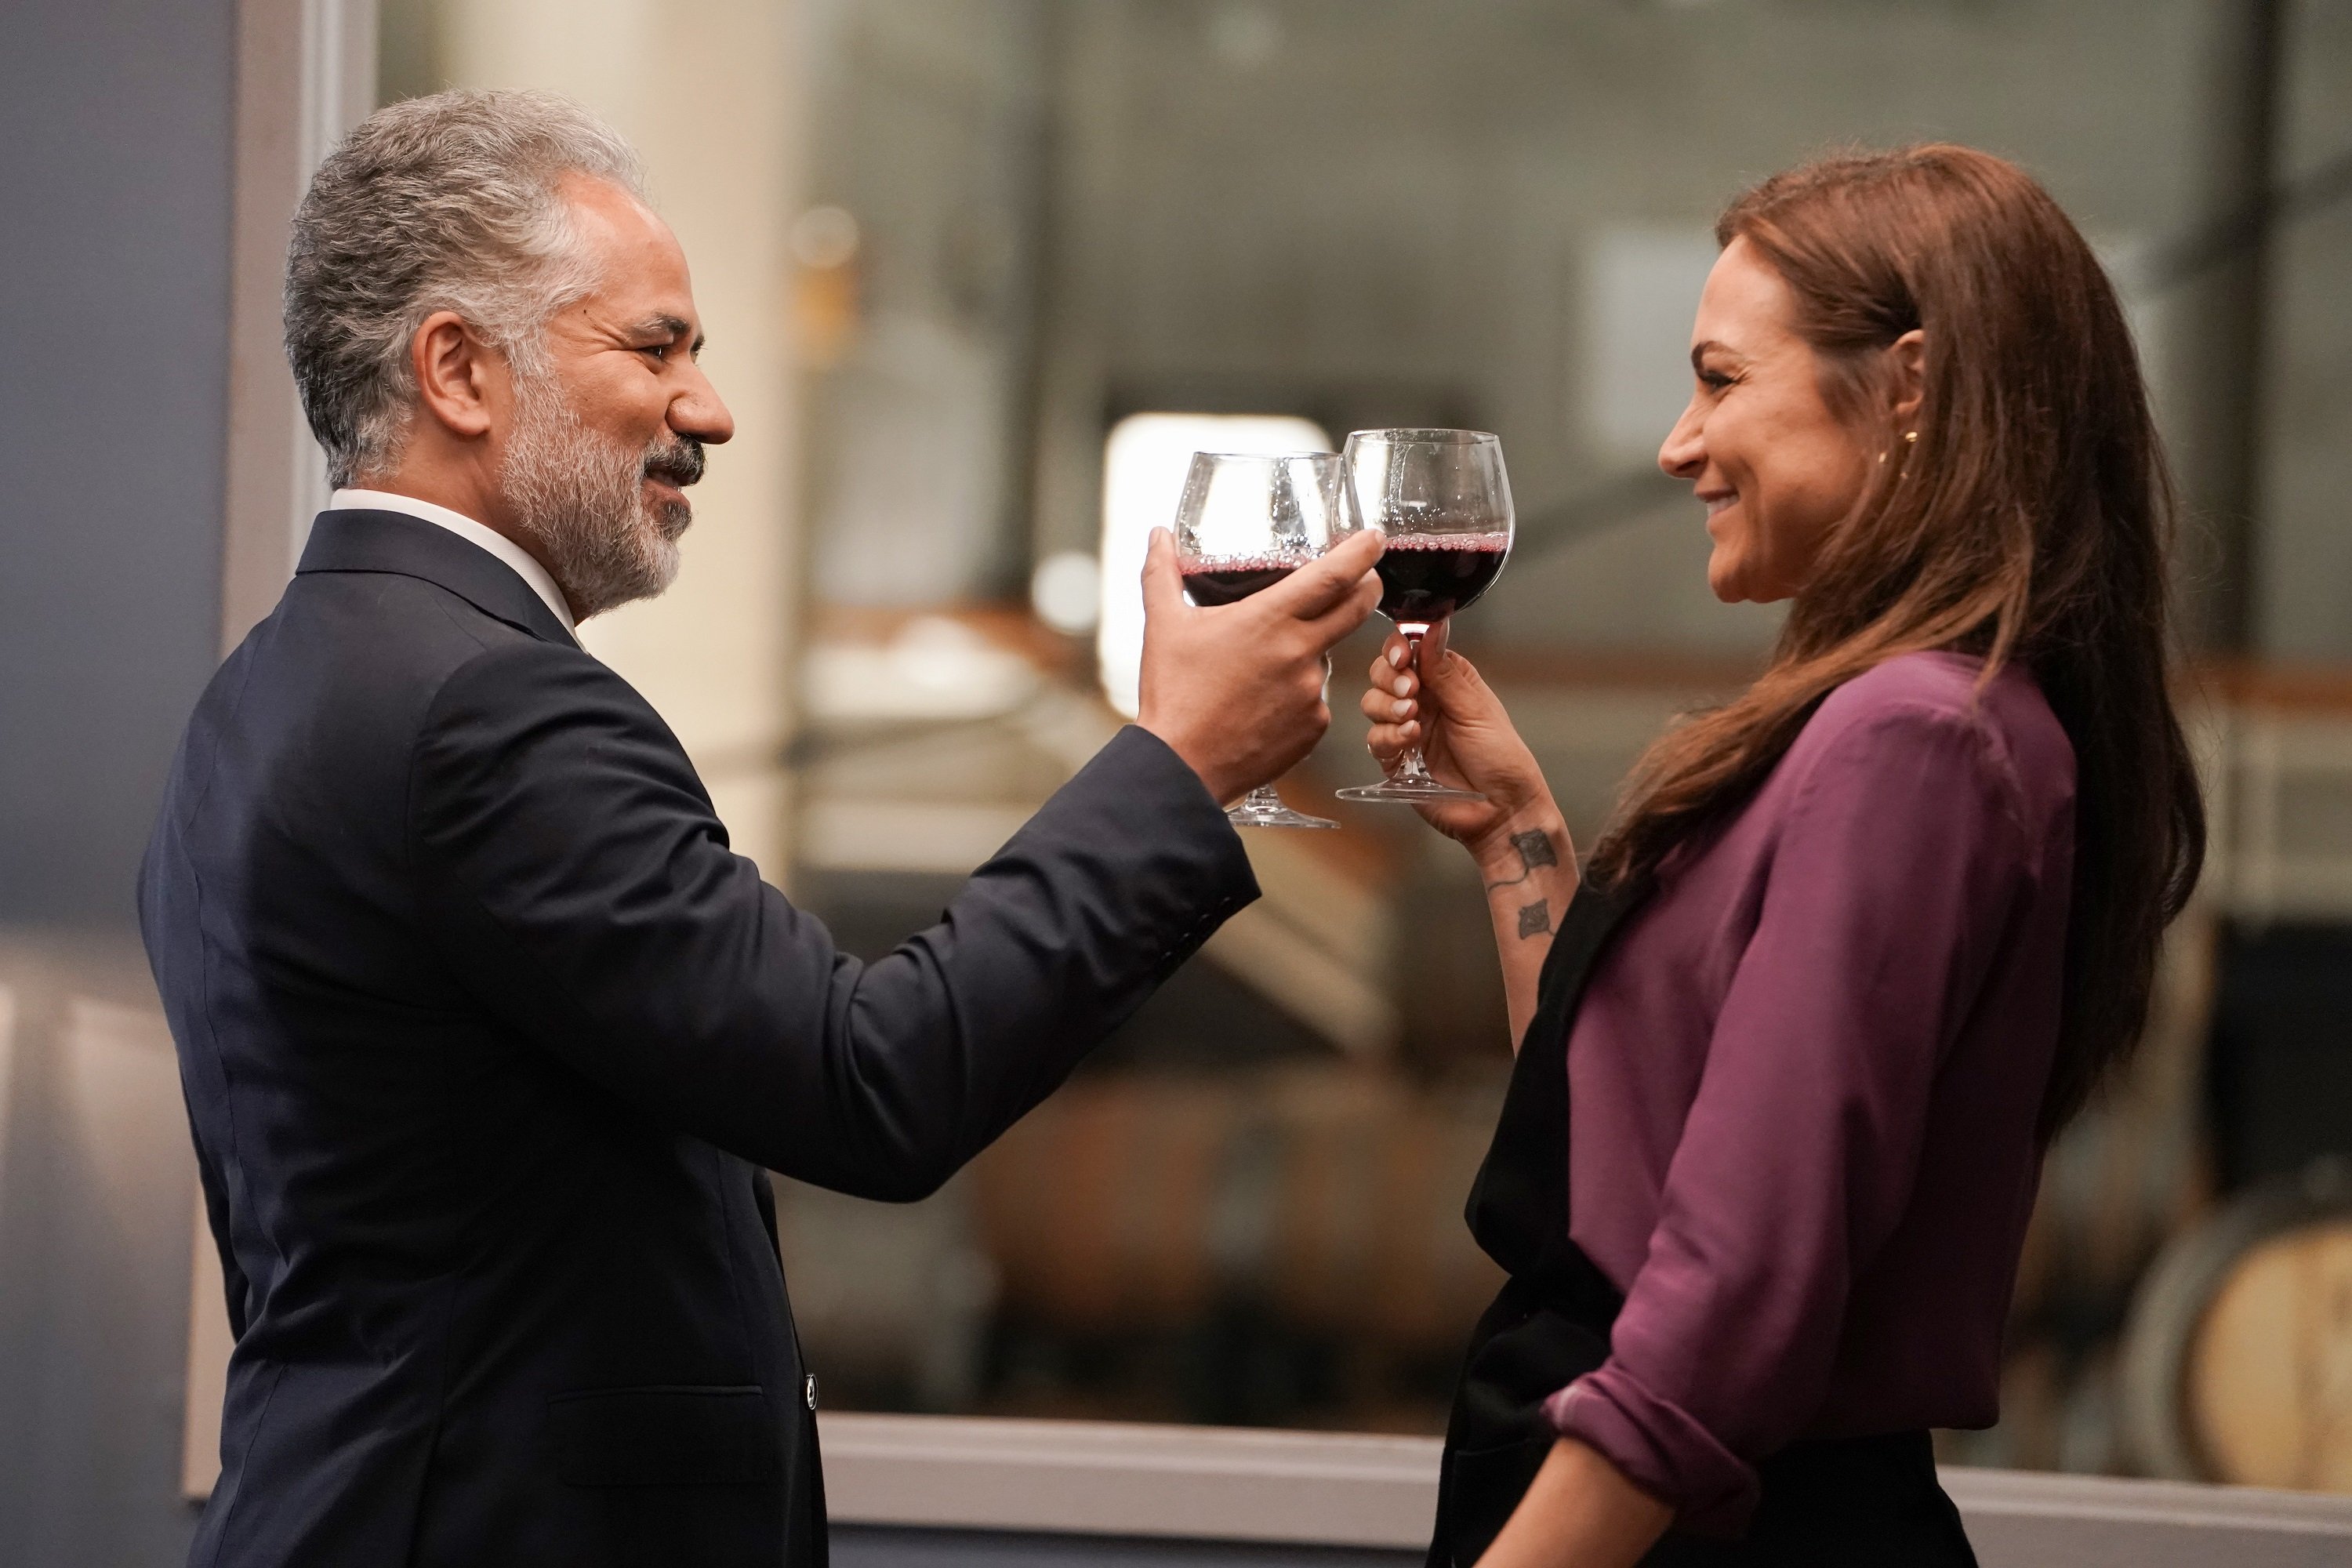 'Promised Land' cast members John Ortiz and Christina Ochoa as Joe and Veronica Sandoval smile at each other while holding up glasses of wine.